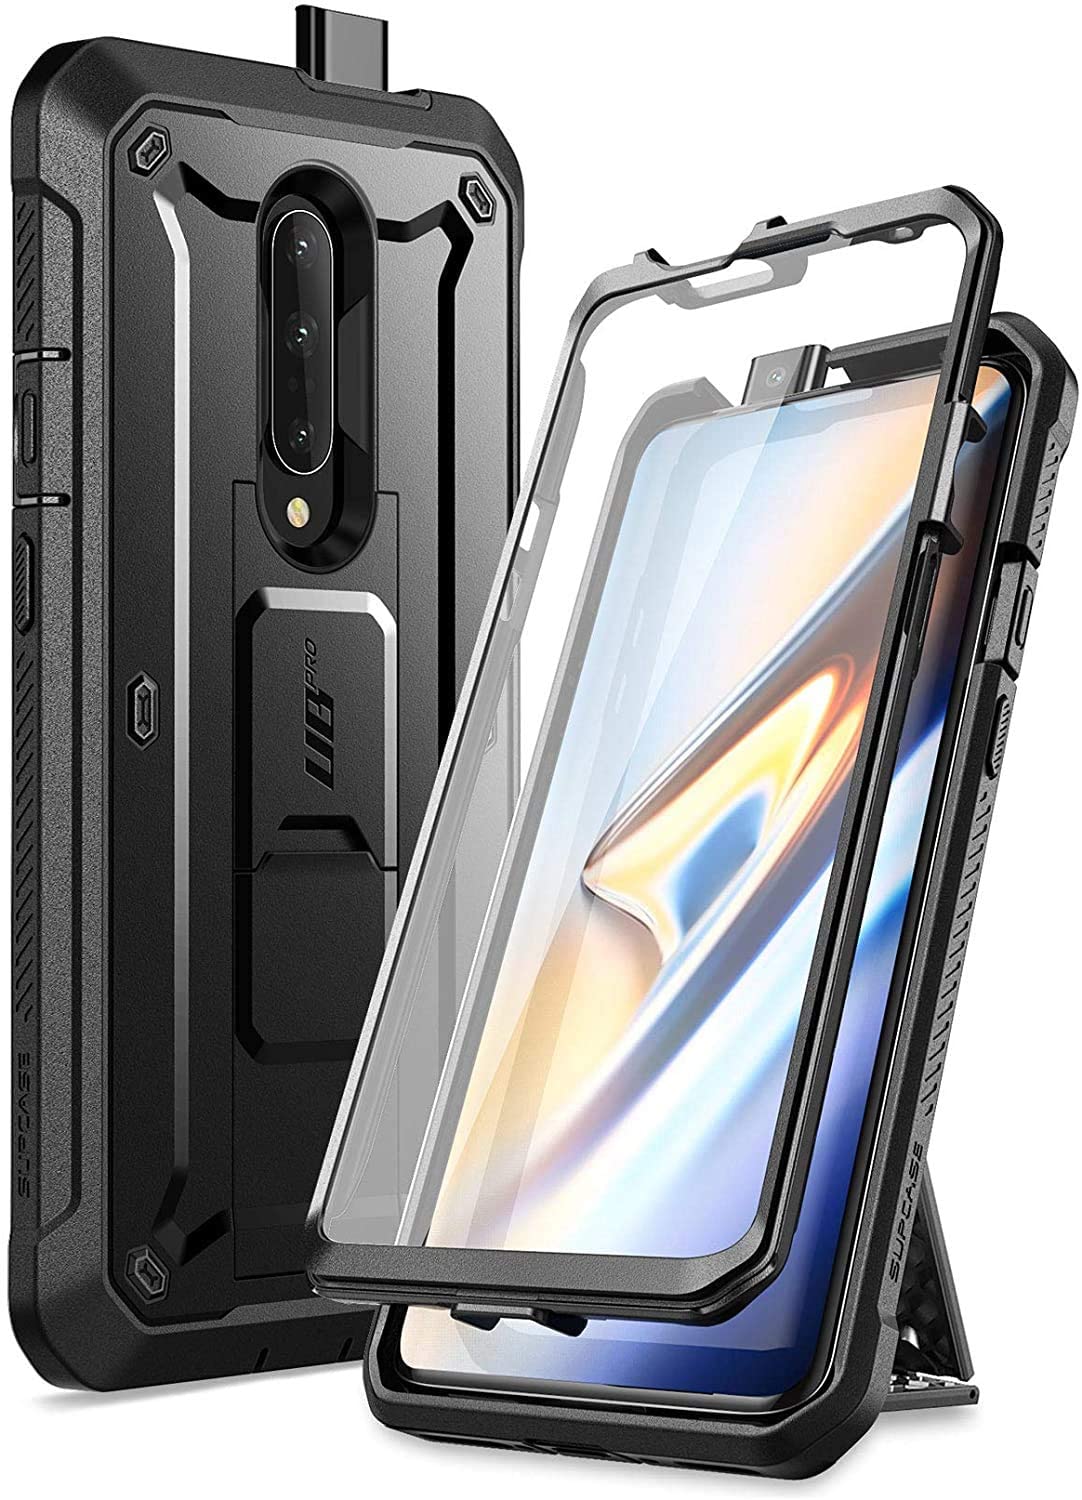 SUPCASE Unicorn Beetle Pro OnePlus 7 / 7T Pro / 7T Full-Body Rugged Holster Kickstand Case with Built-in Screen Protector (Black)